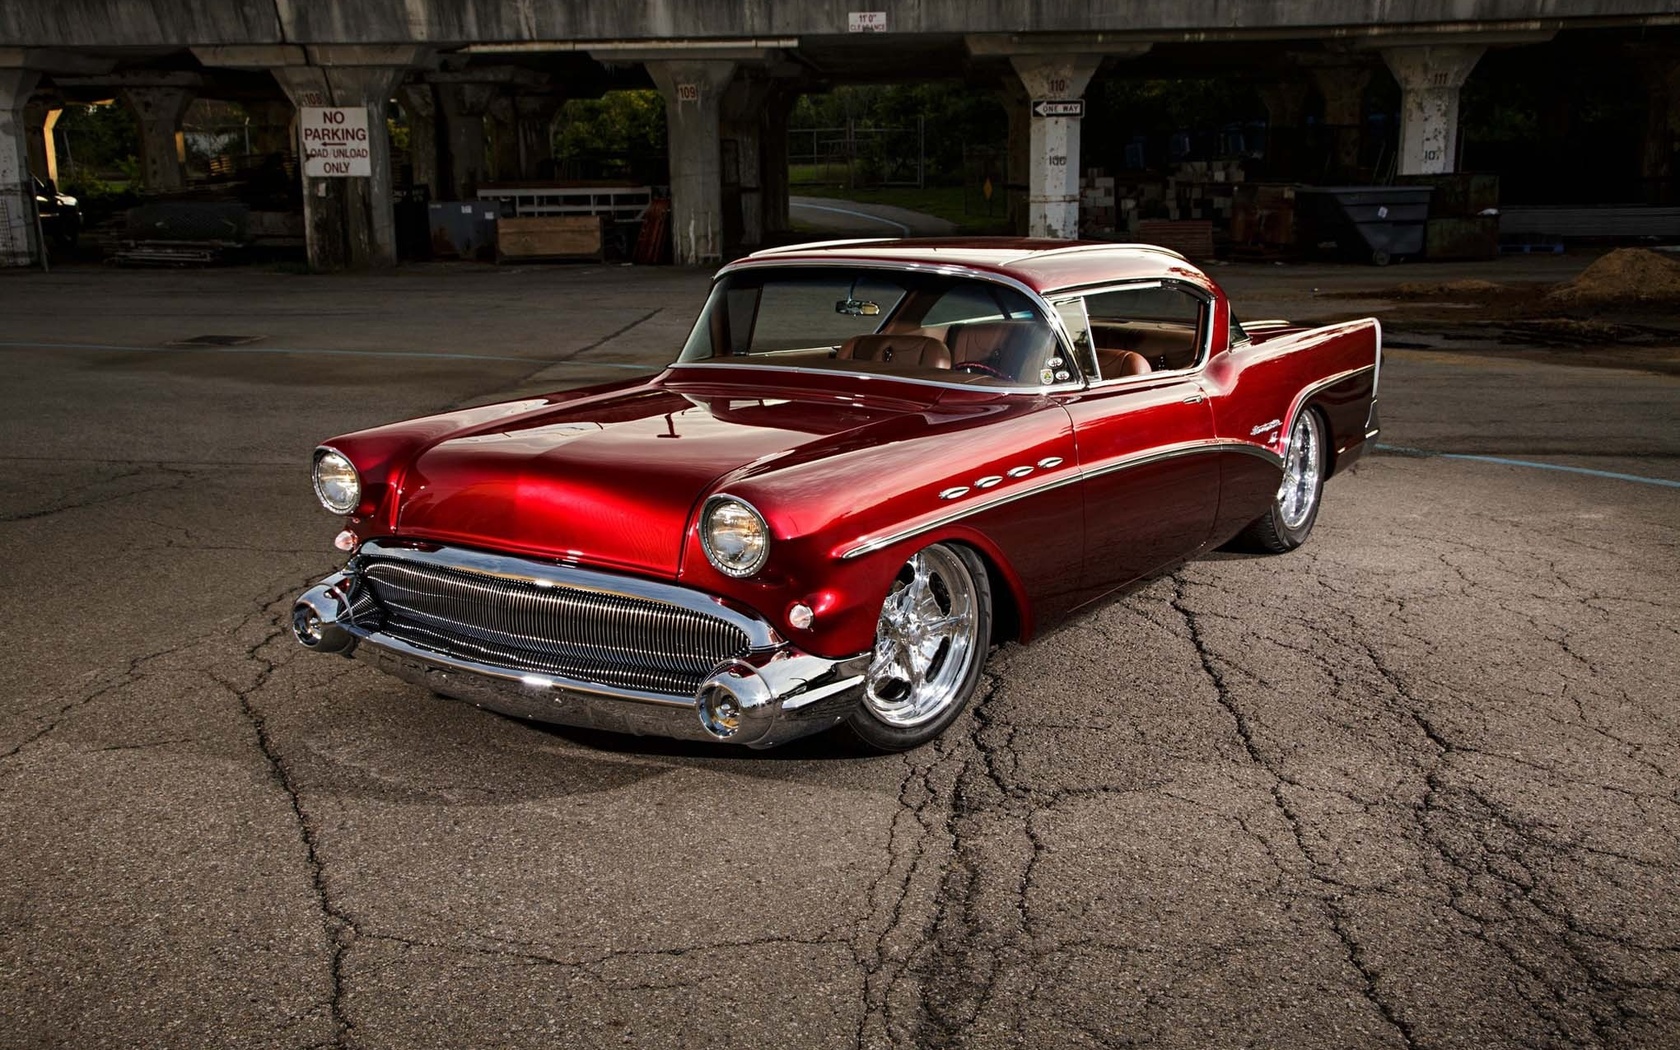 american, classic, car, buick, red